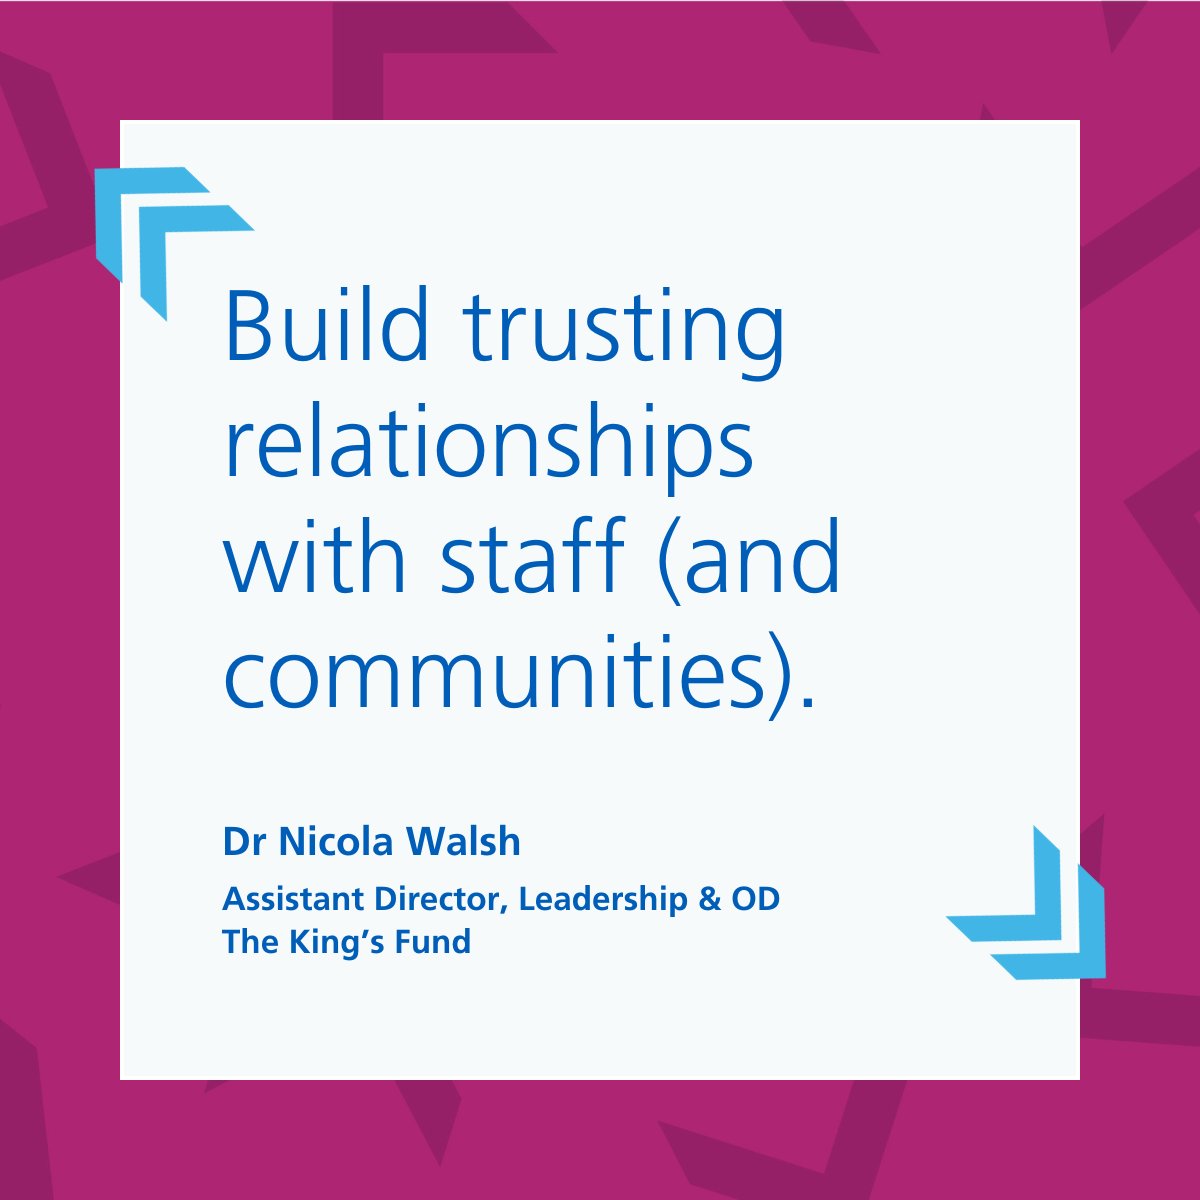 Collaborative leadership isn't just about working together, it's about building trust – a lesson from @TheKingsFund decade of insights with health and care leaders. Click the linkinbio for more key leadership skills with Dr Nicola Walsh. #FutureNHS #connect #share #learn